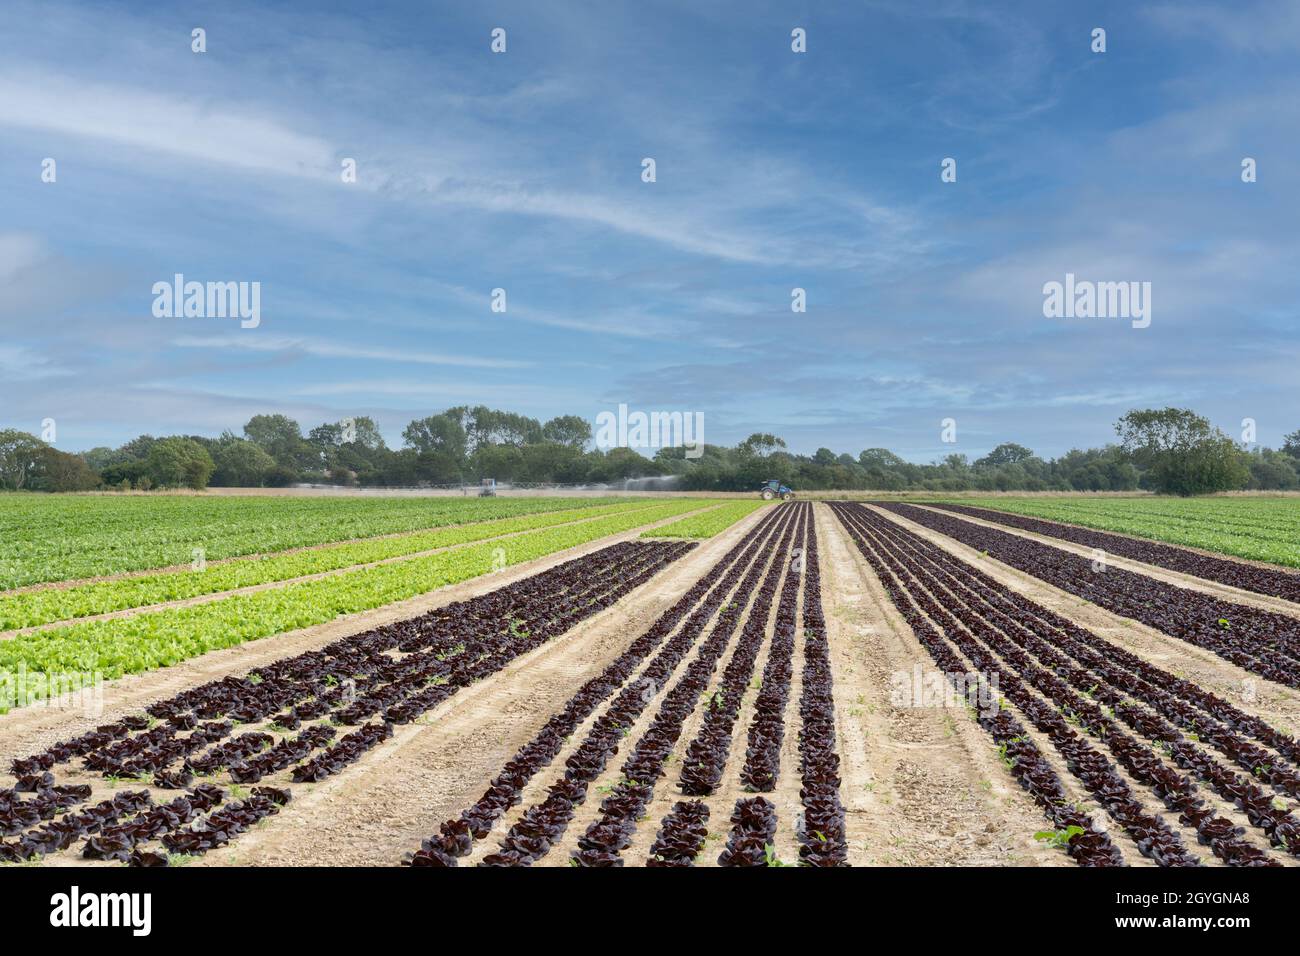 Rows of lettuces growing in a field in West Sussex with a crop irrigation system and tractor in the background. Stock Photo